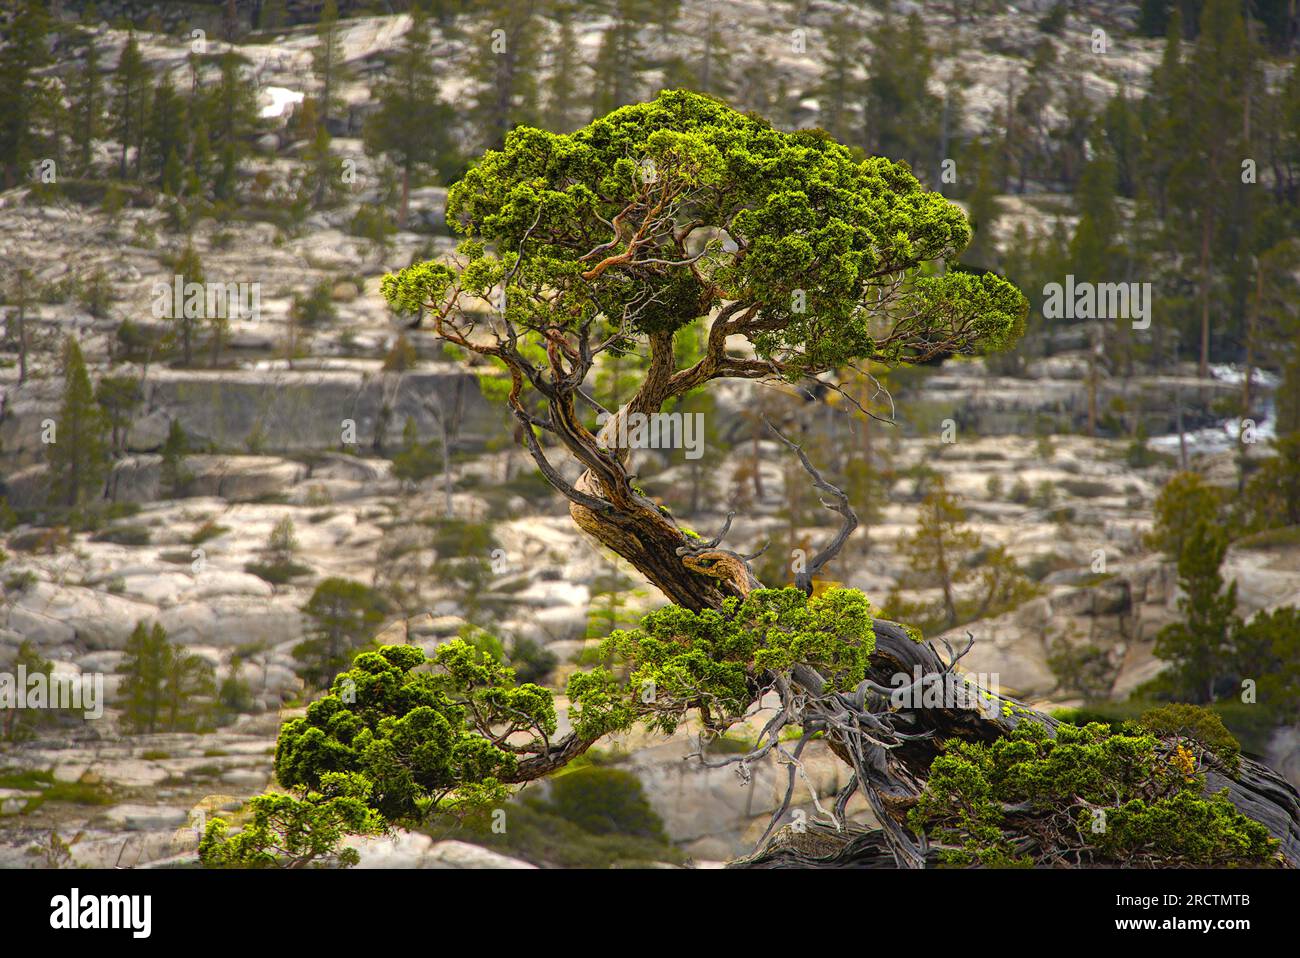 A bonsai like pine tree with alpine mountains in the background. Stock Photo